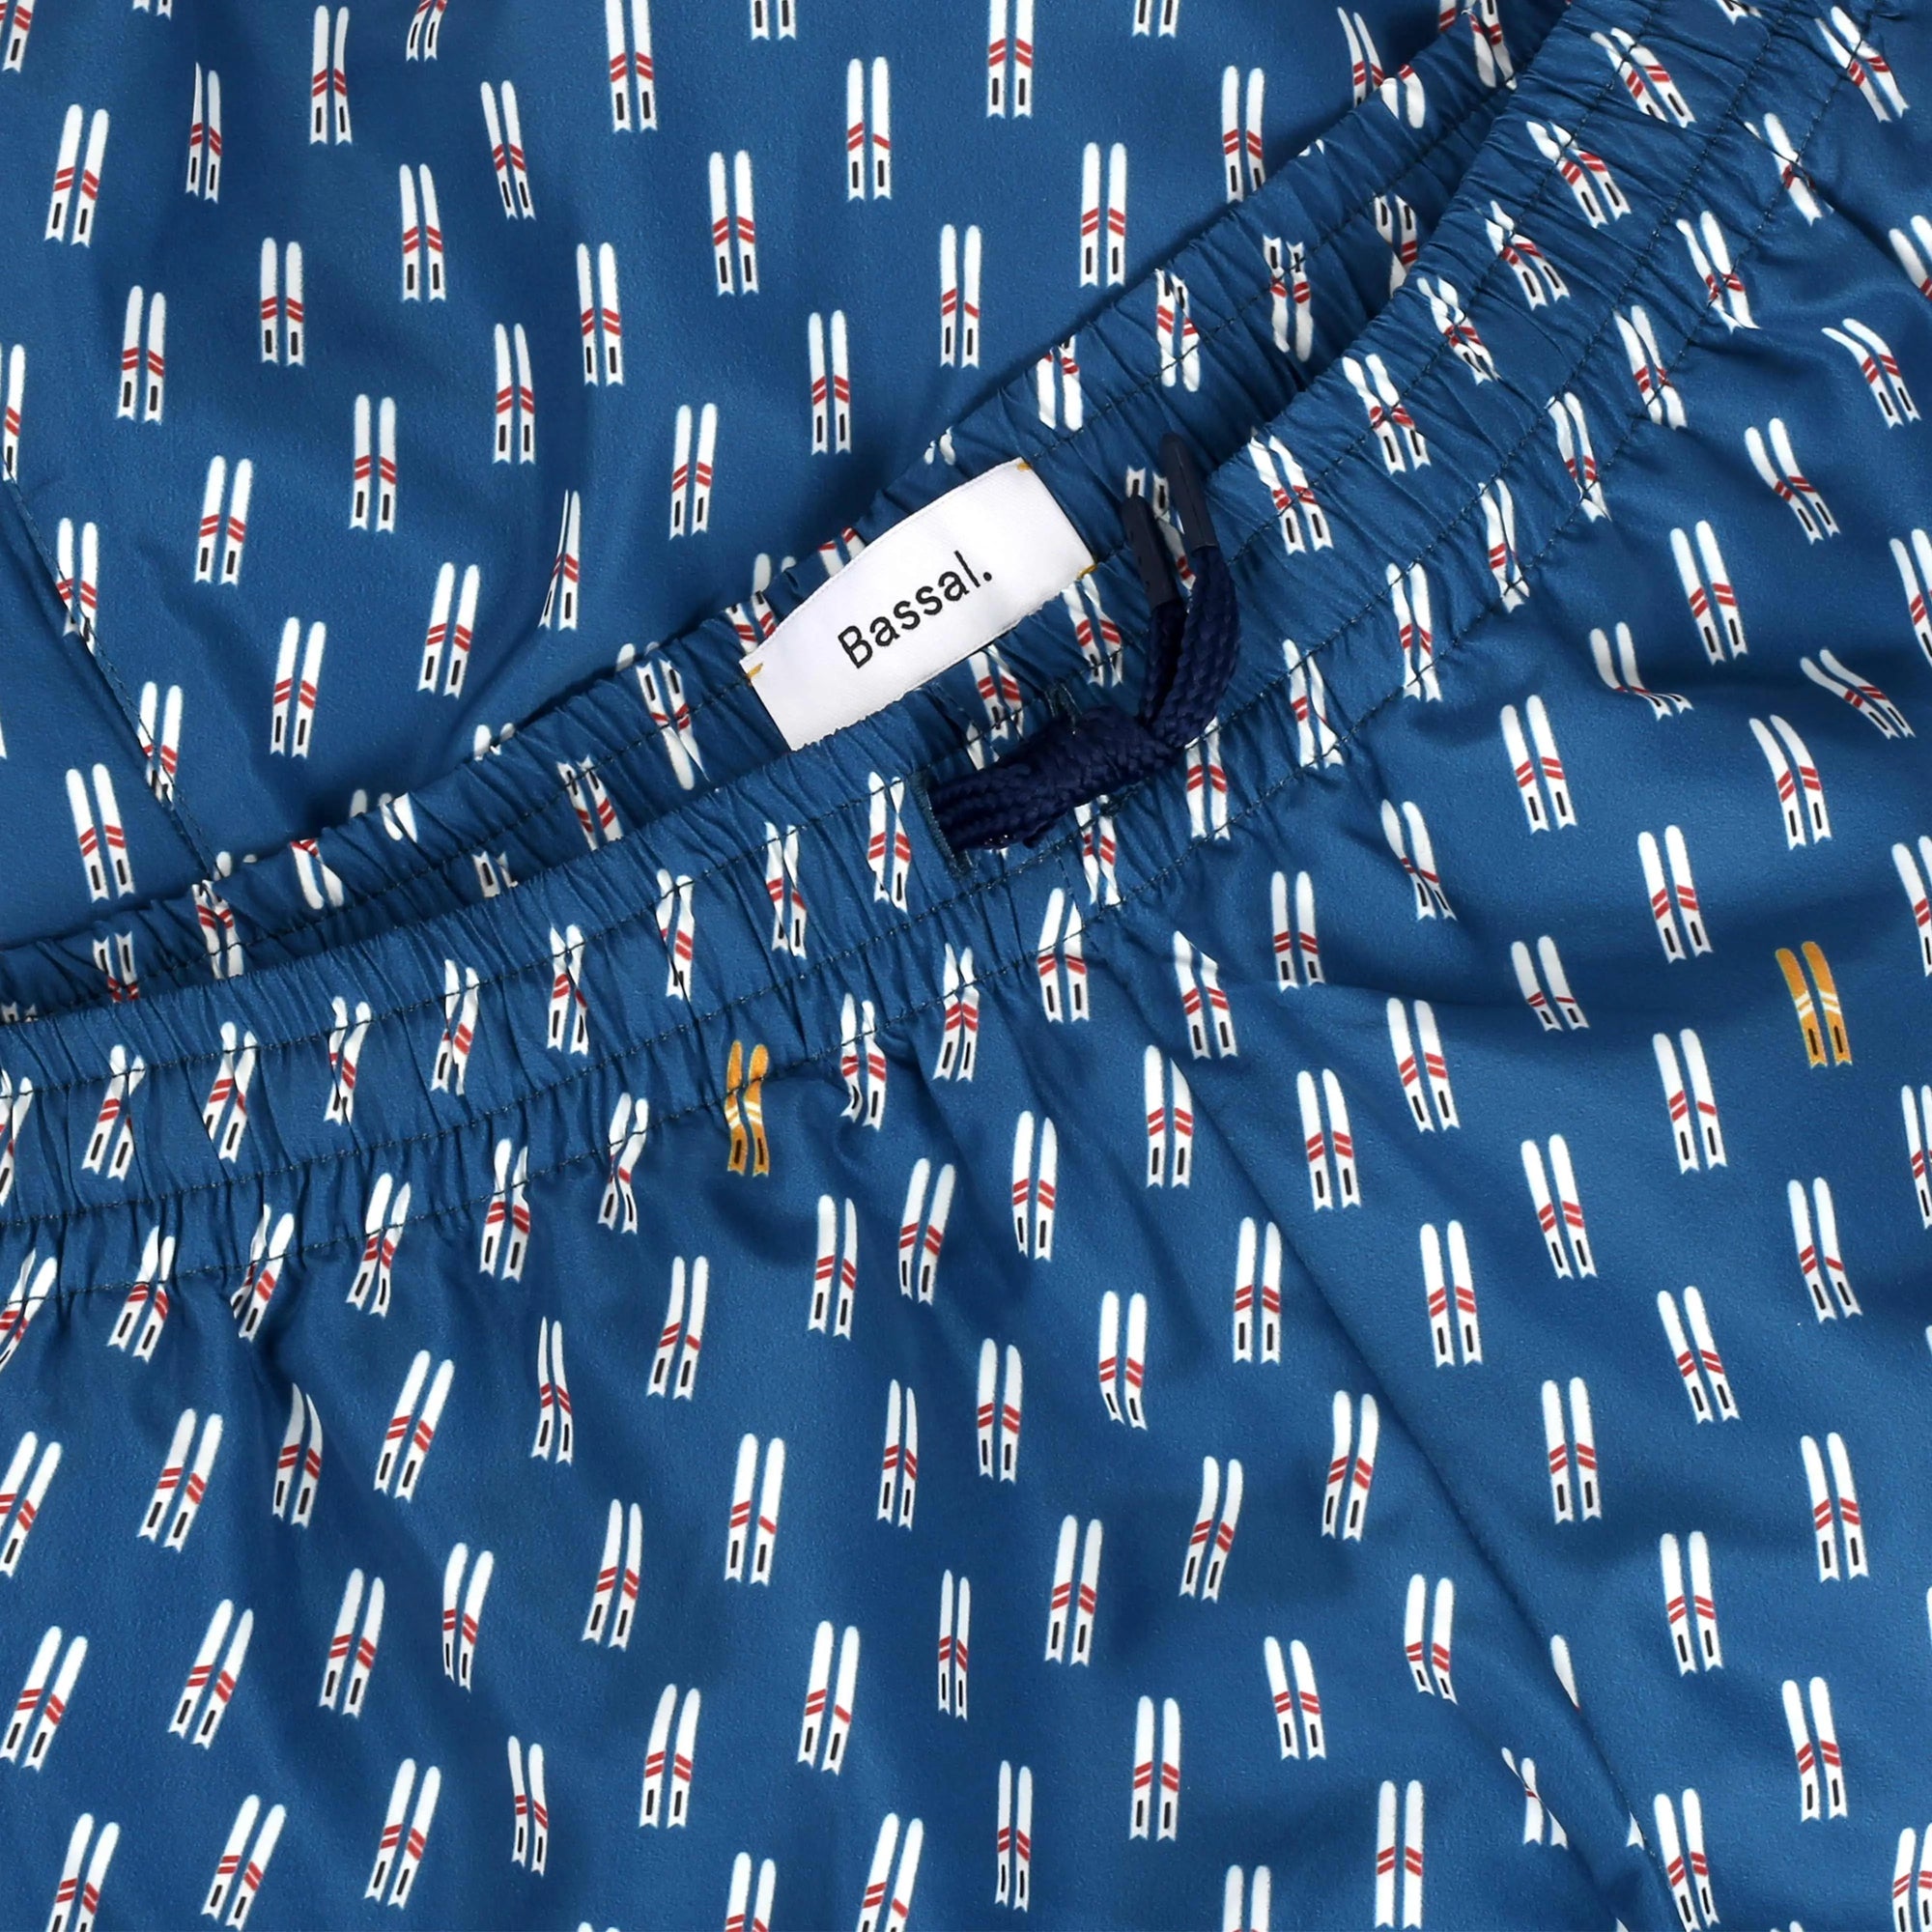 A box of Ski Swimwear men's swim trunks with a blue base color and a pattern of small surfboards. The open box, branded with the name "Bassal," hints at the quality you'd expect from Barcelona's premier store. A tag and an additional label attached to the trunks are visible.